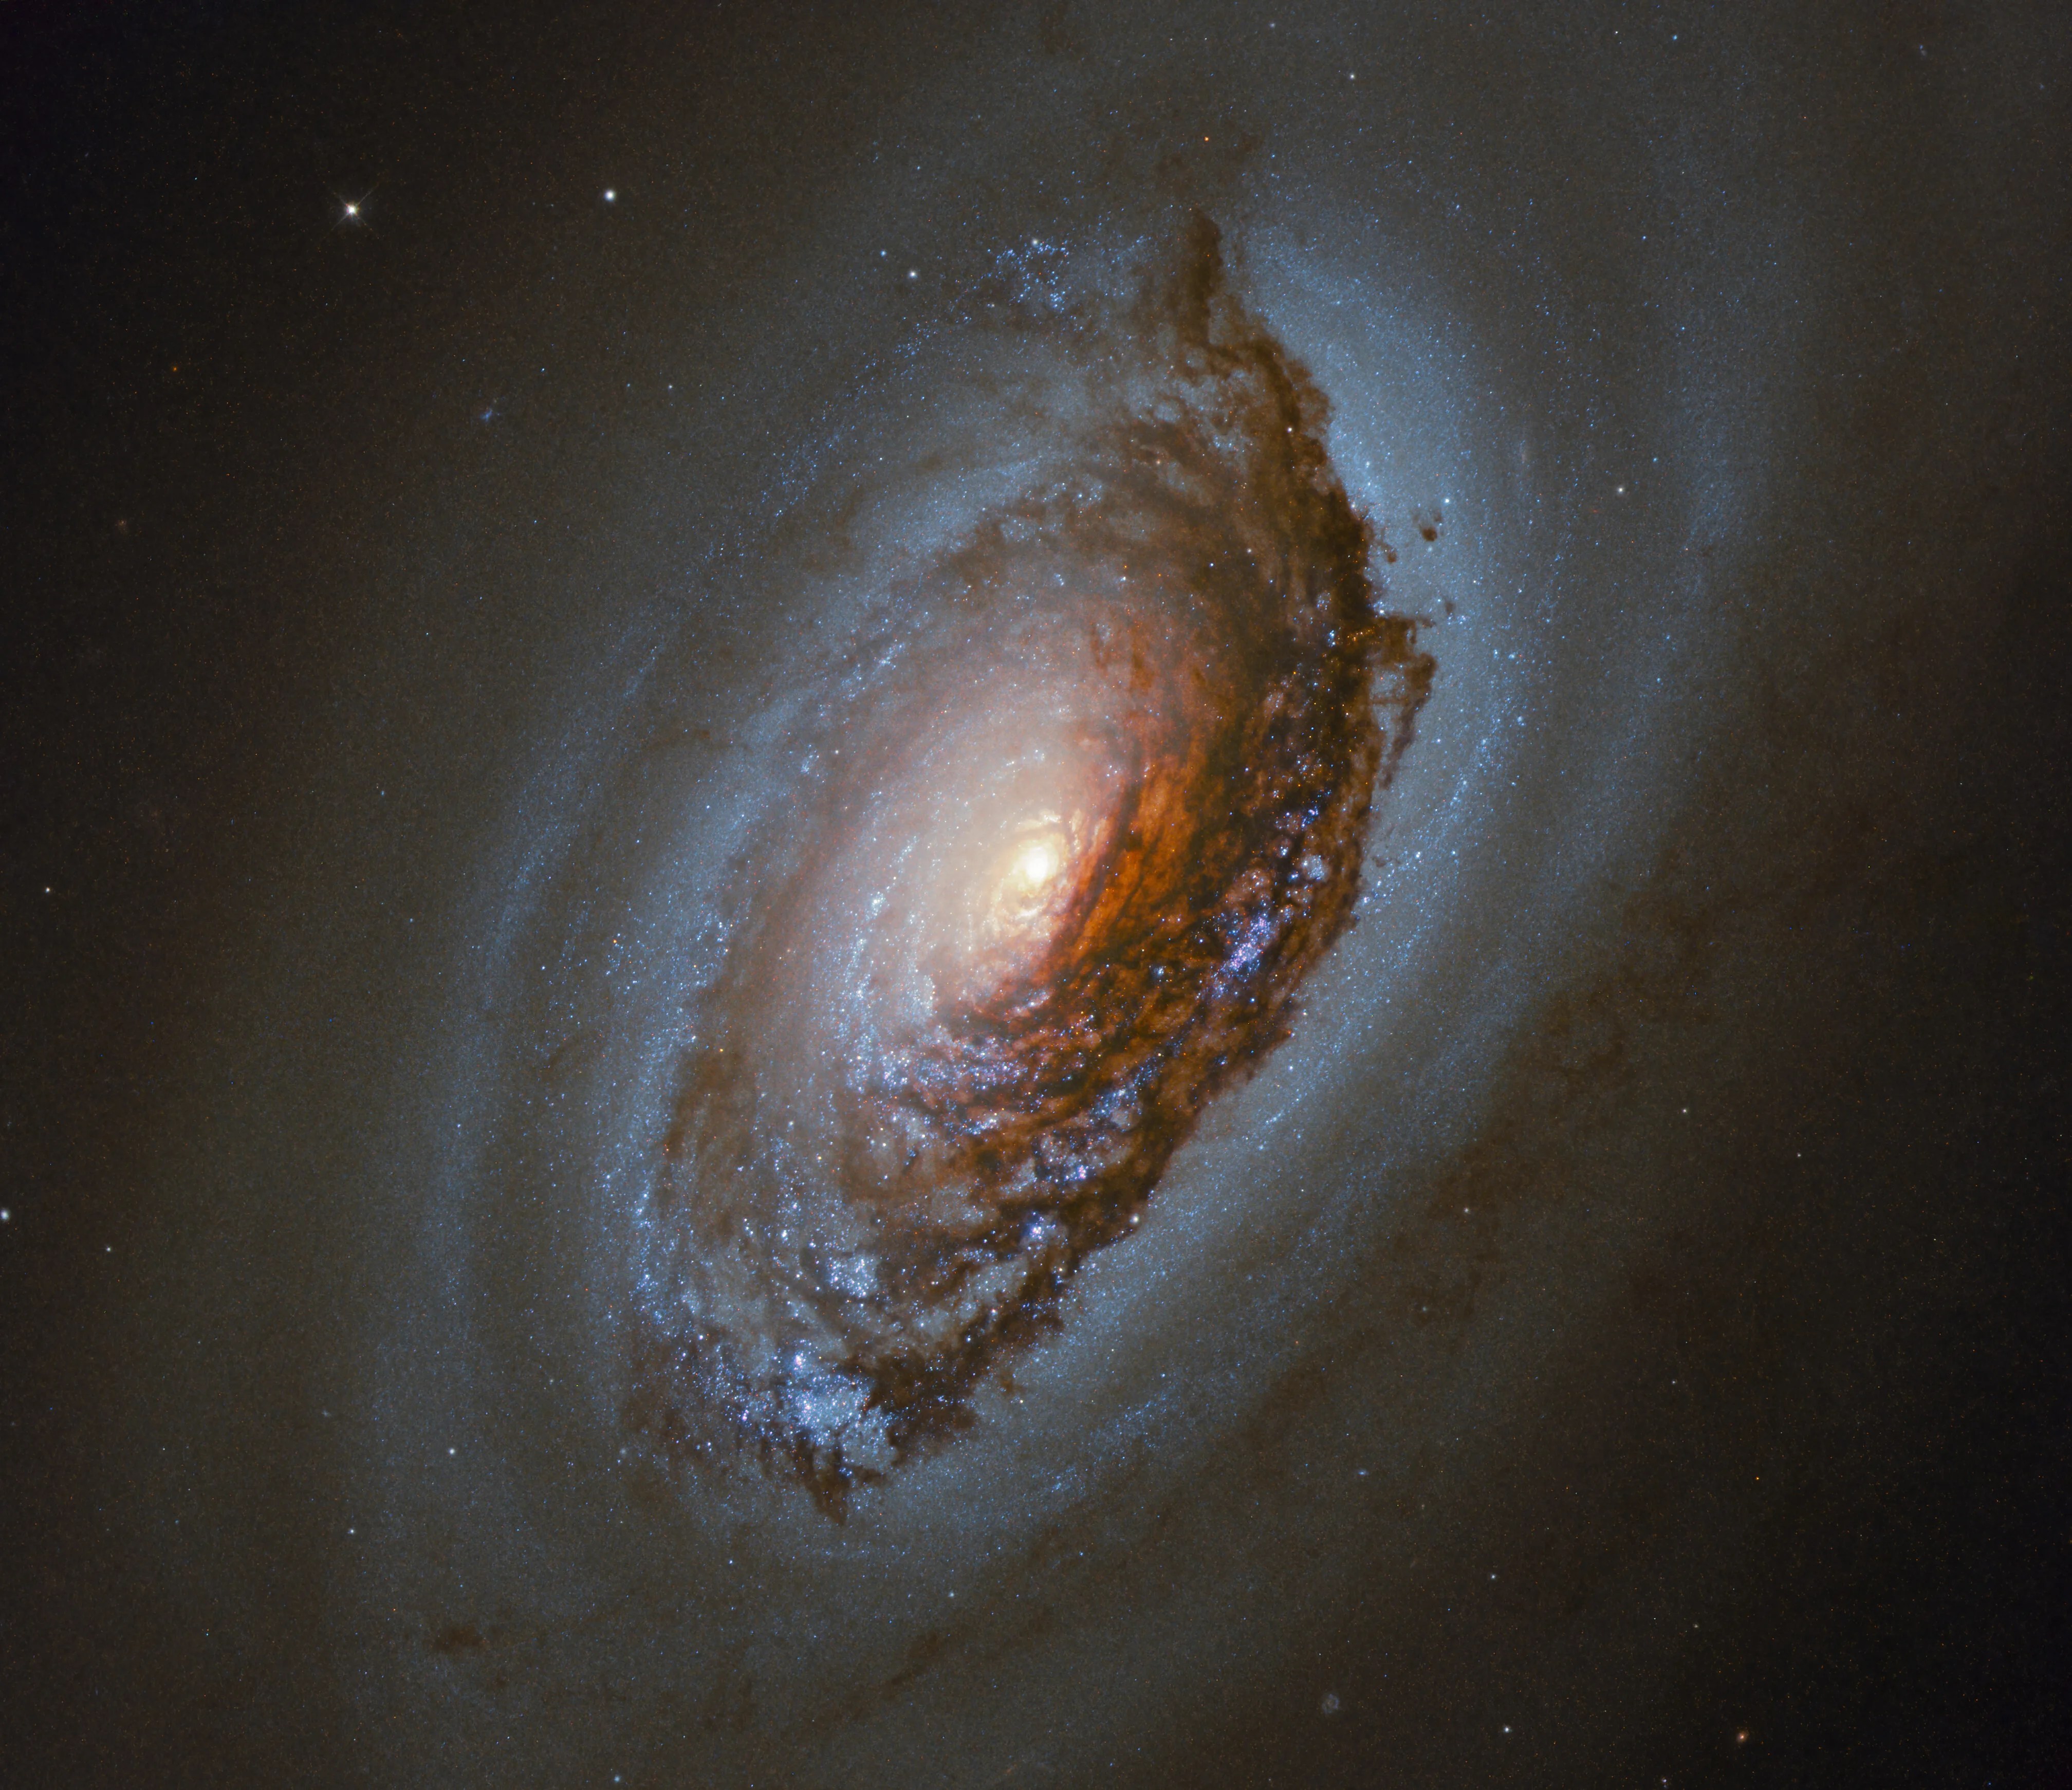 This image taken with the nasa/esa hubble space telescope features ngc 4826, a spiral galaxy located 17 million light-years away